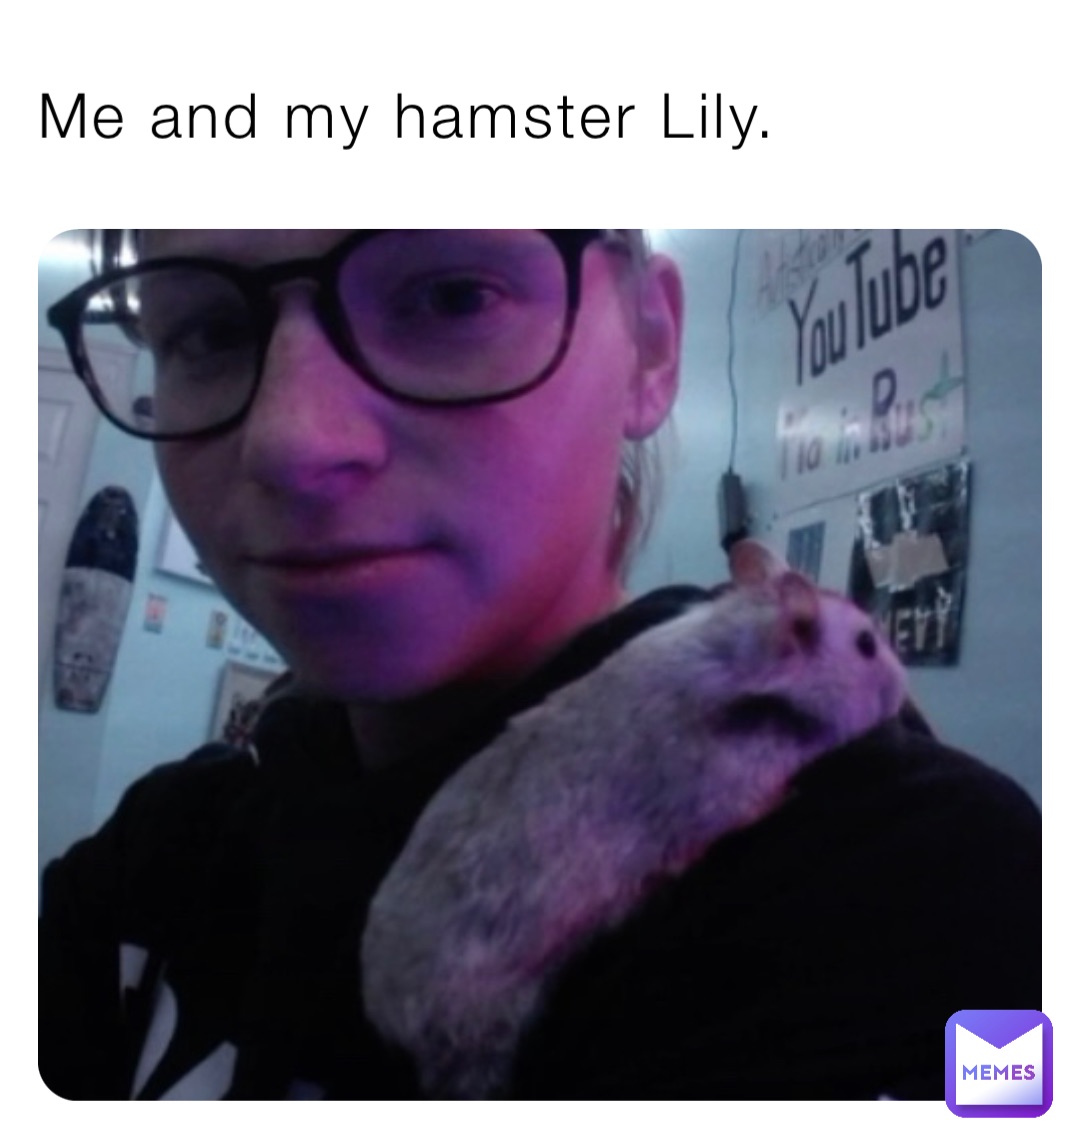 Me and my hamster Lily.